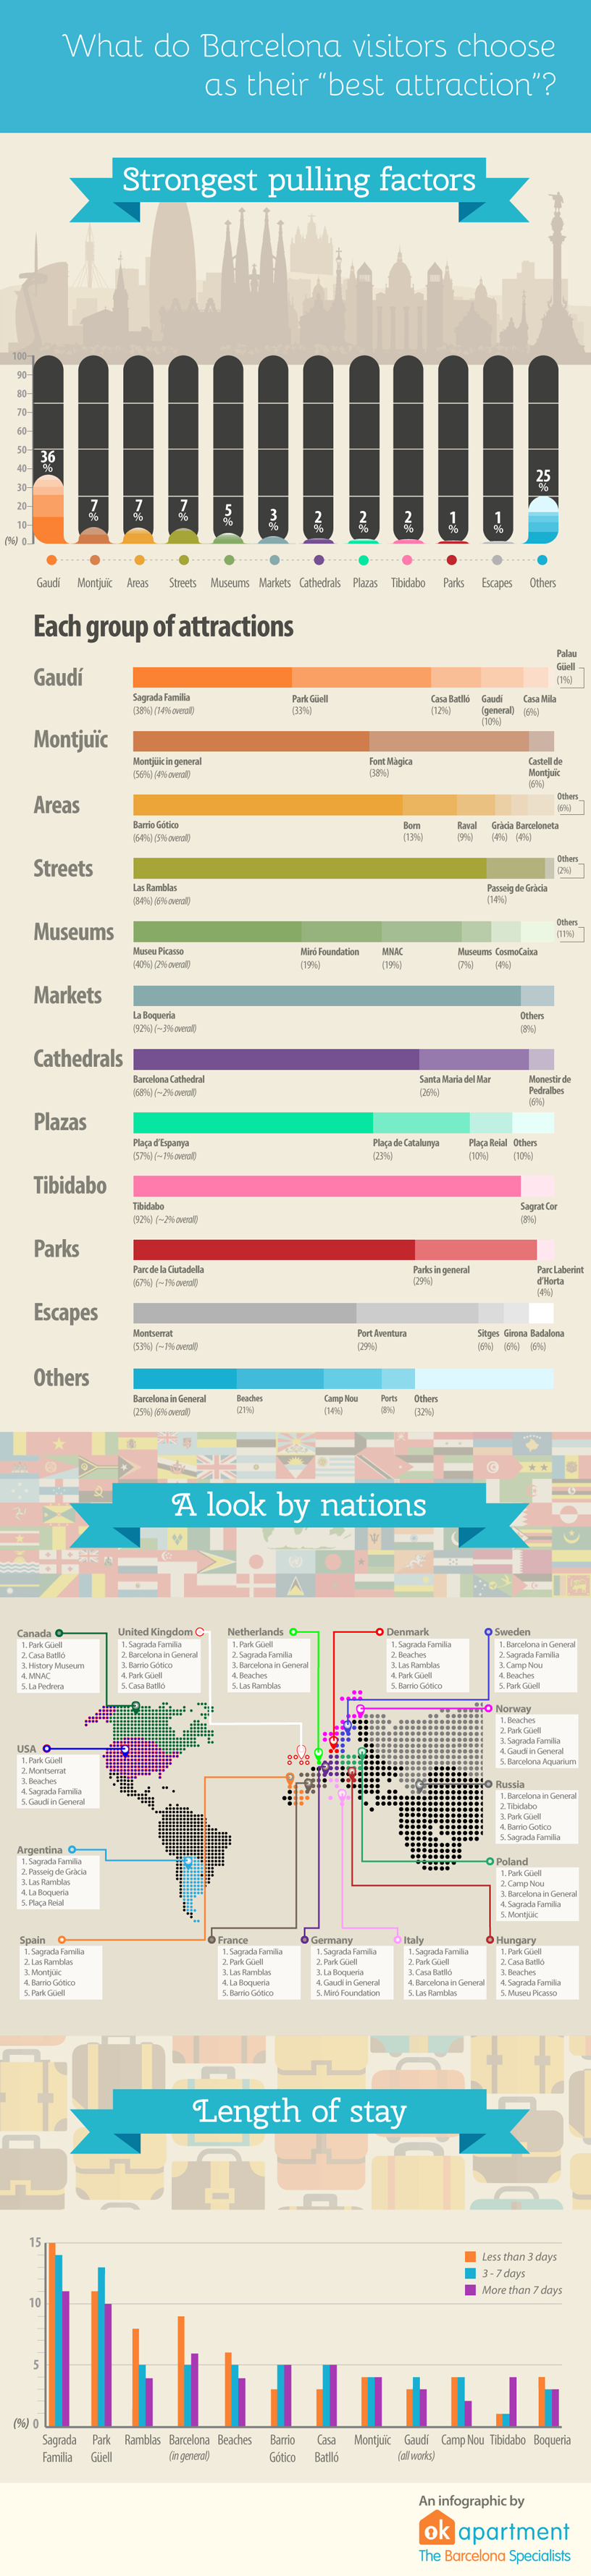 An infographic about the best attractions in Barcelona